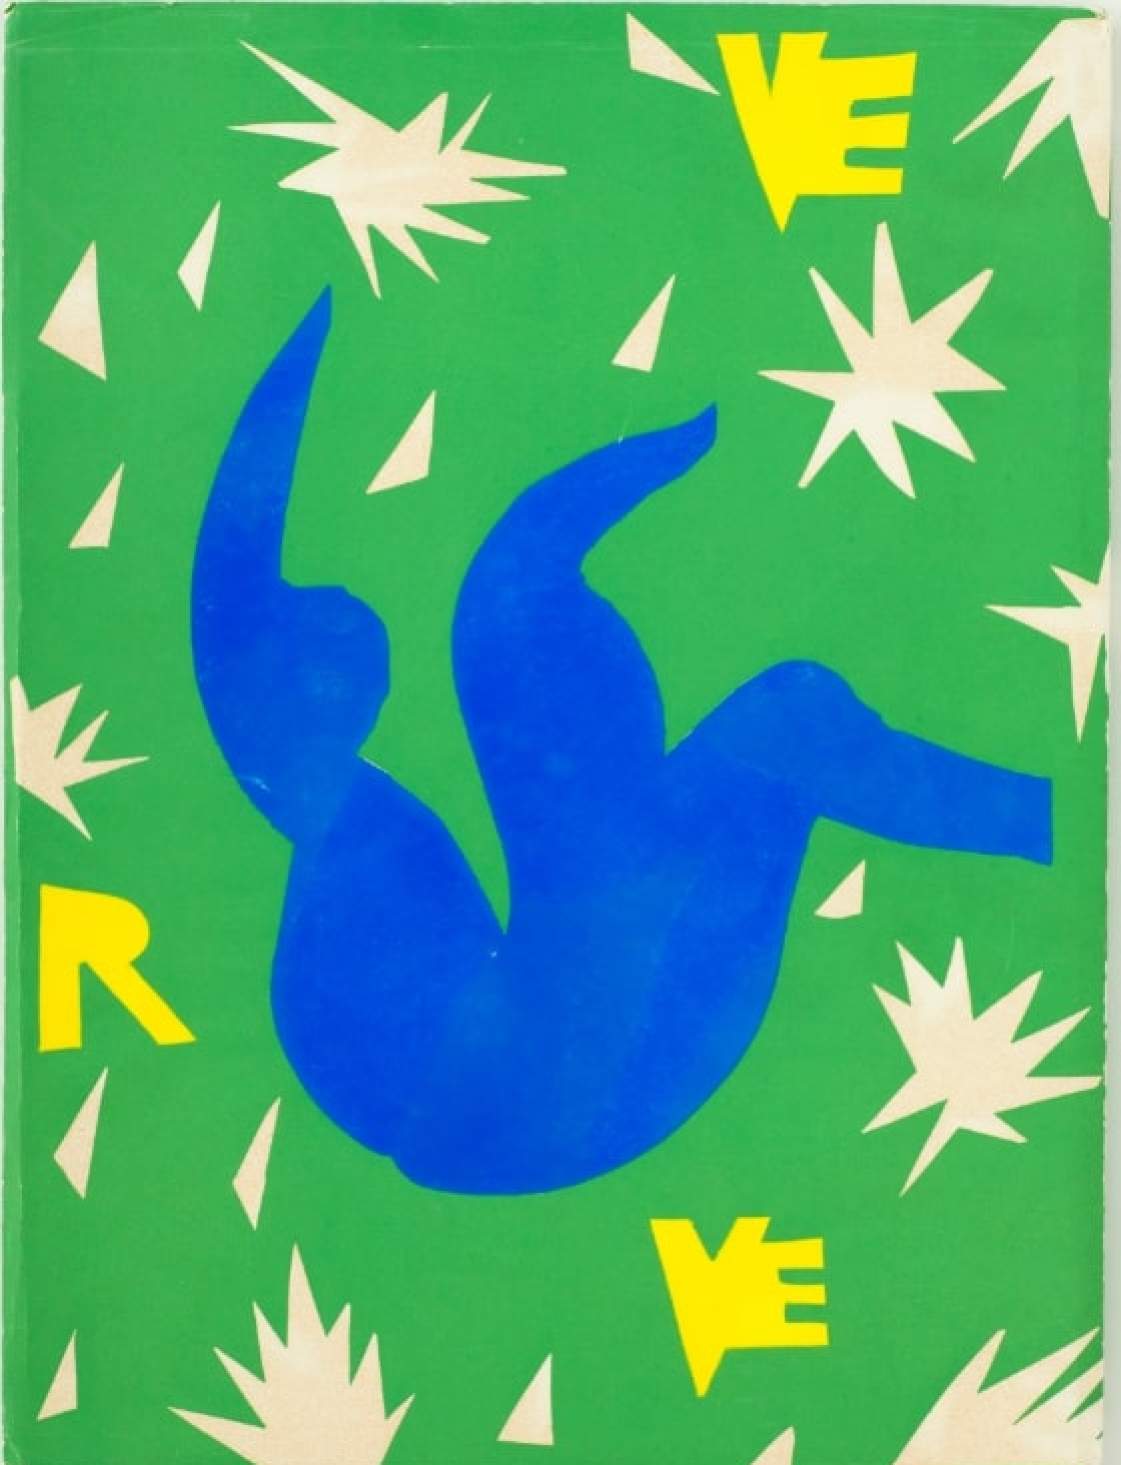 A lithography of a study for the front cover of the journal “Verve” volume IV, no. 13, entitled “Henri Matisse. De la couleur” (1945), which was to have been exhibited in China. Photo: Succession H Matisse 2021